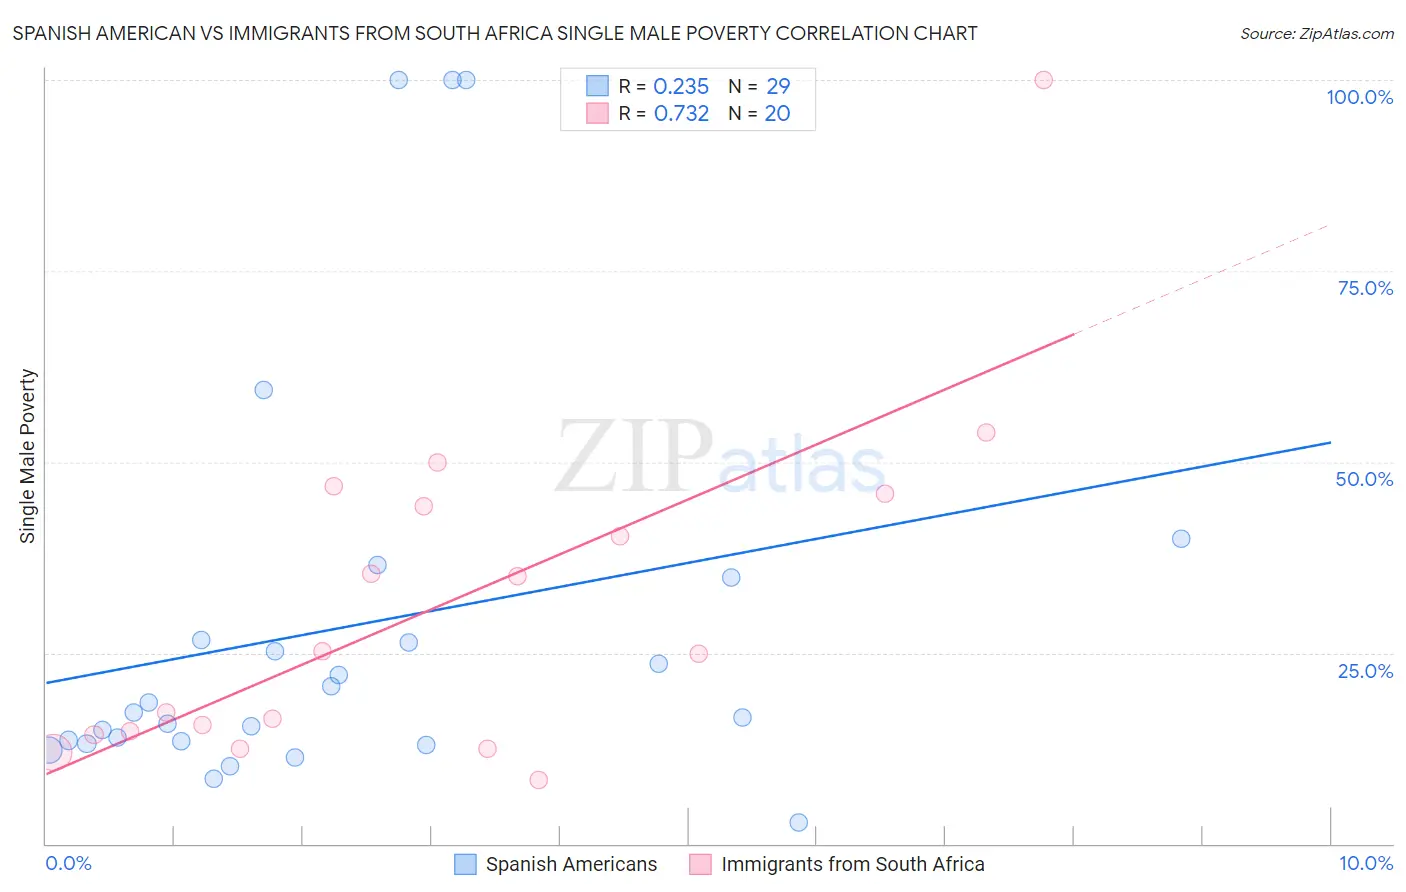 Spanish American vs Immigrants from South Africa Single Male Poverty